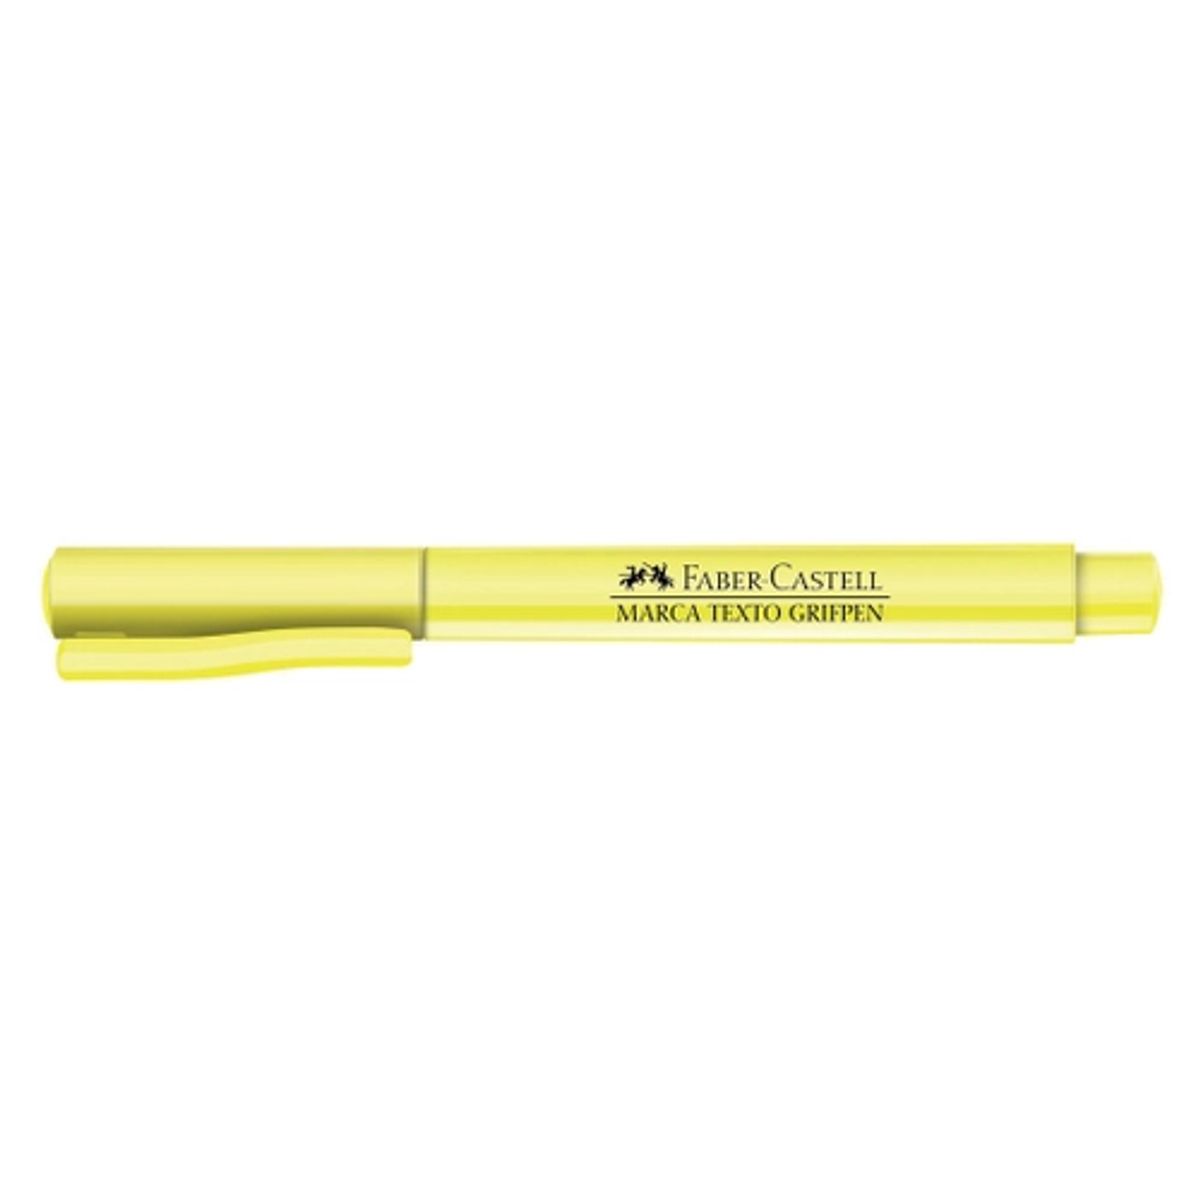 Marca Texto Faber Castell Grifpen Amarelo image number 1